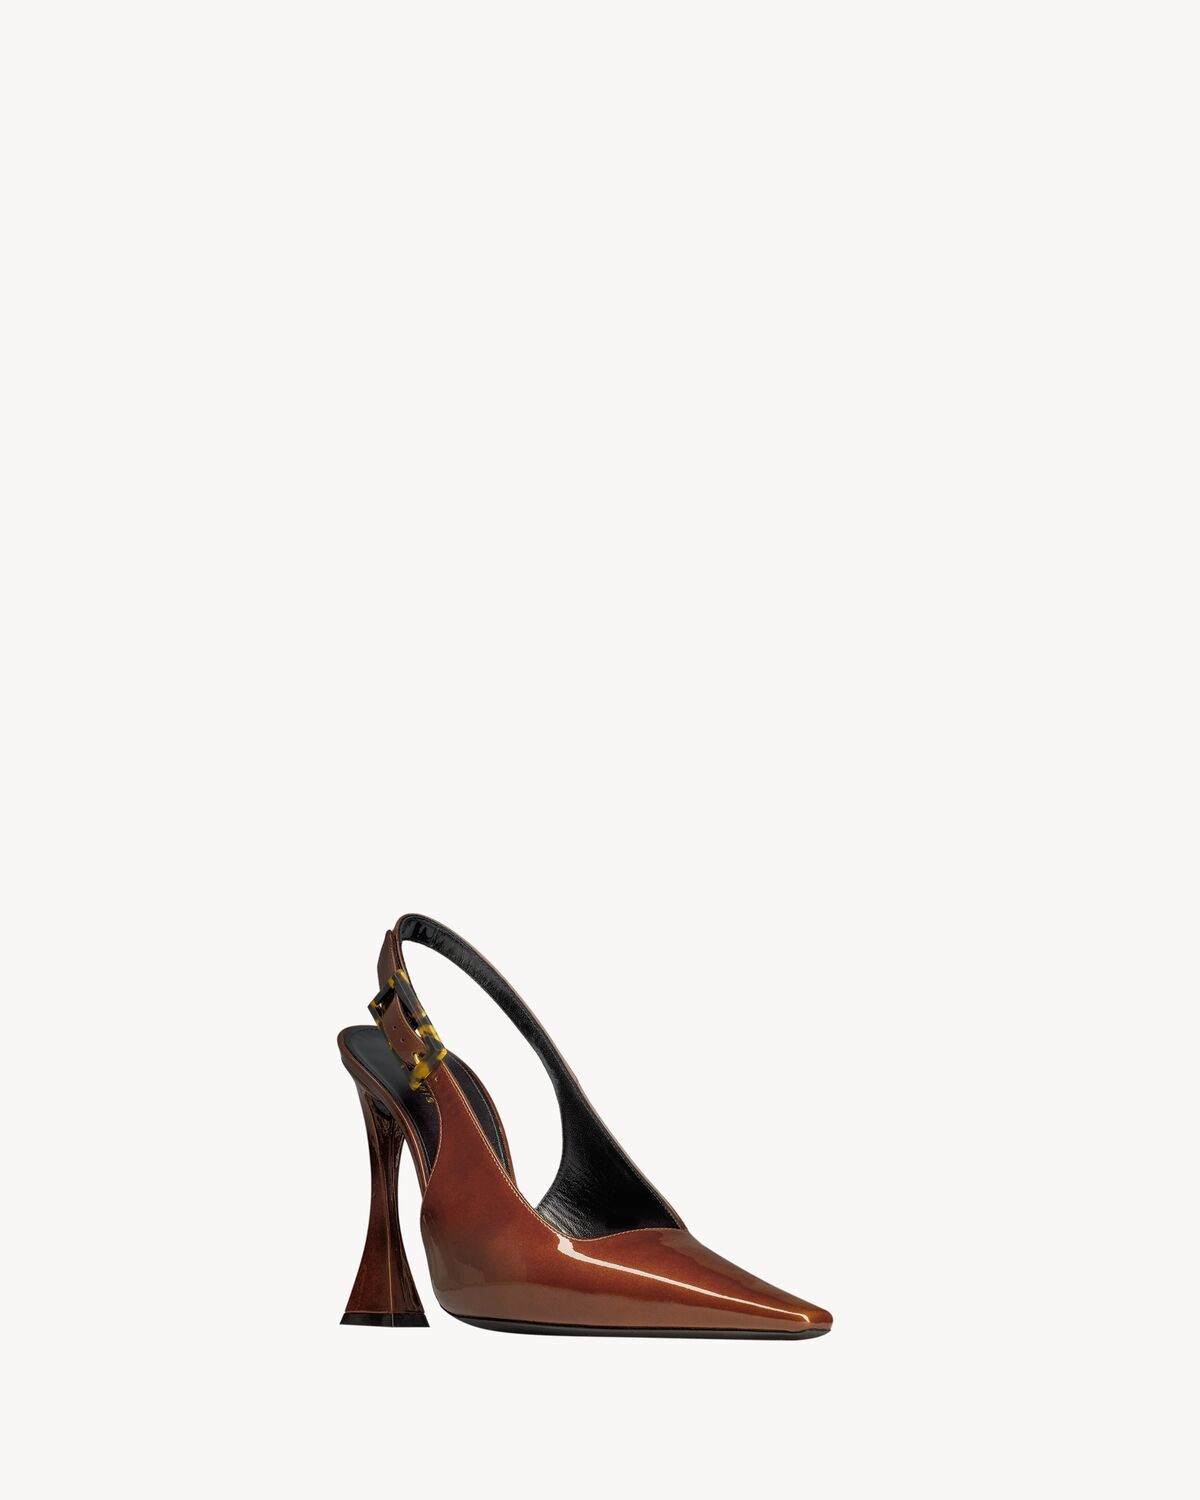 DUNE slingback pumps in patent leather